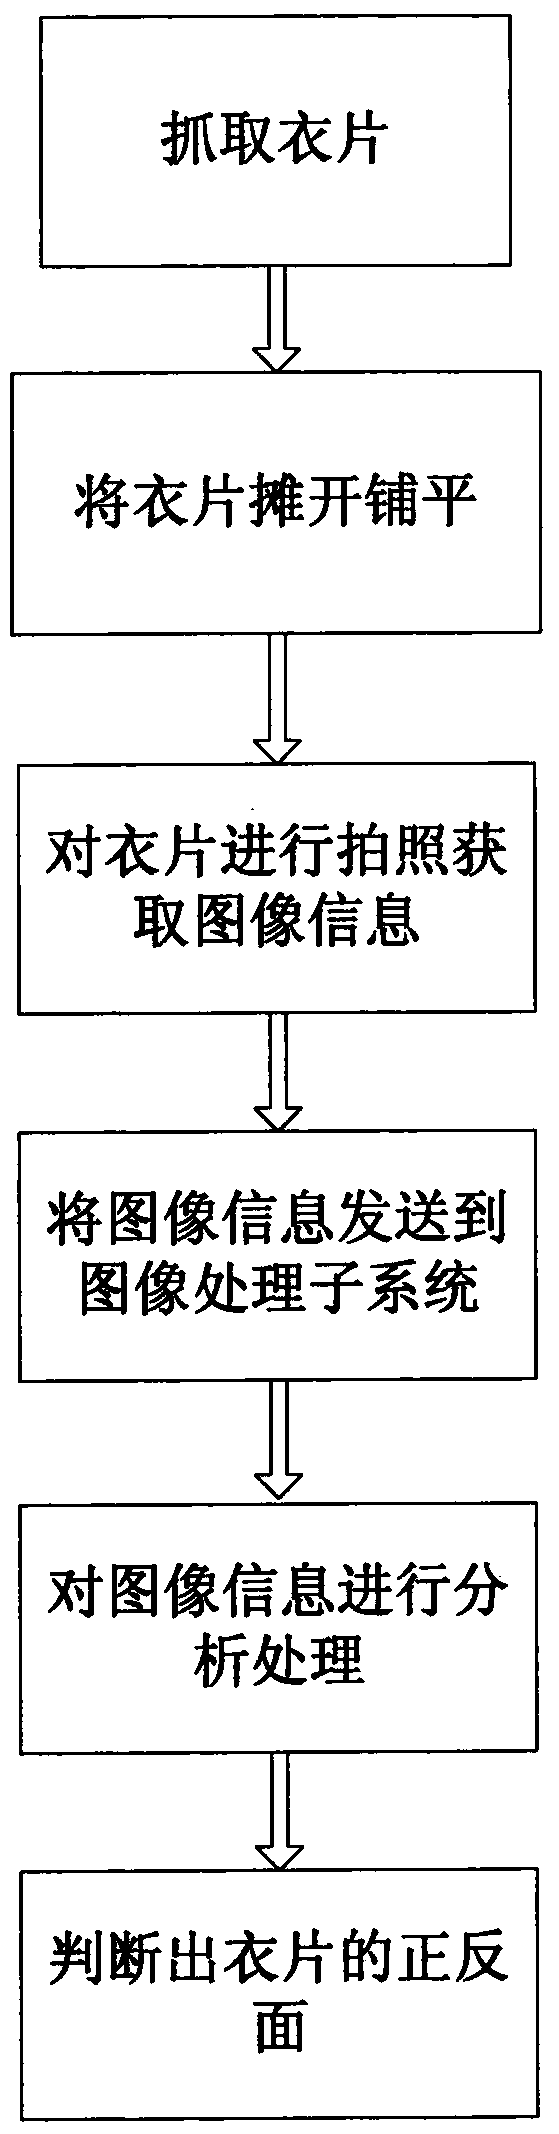 System and method for quick identifying front and back of garment piece fabric by automatic production line